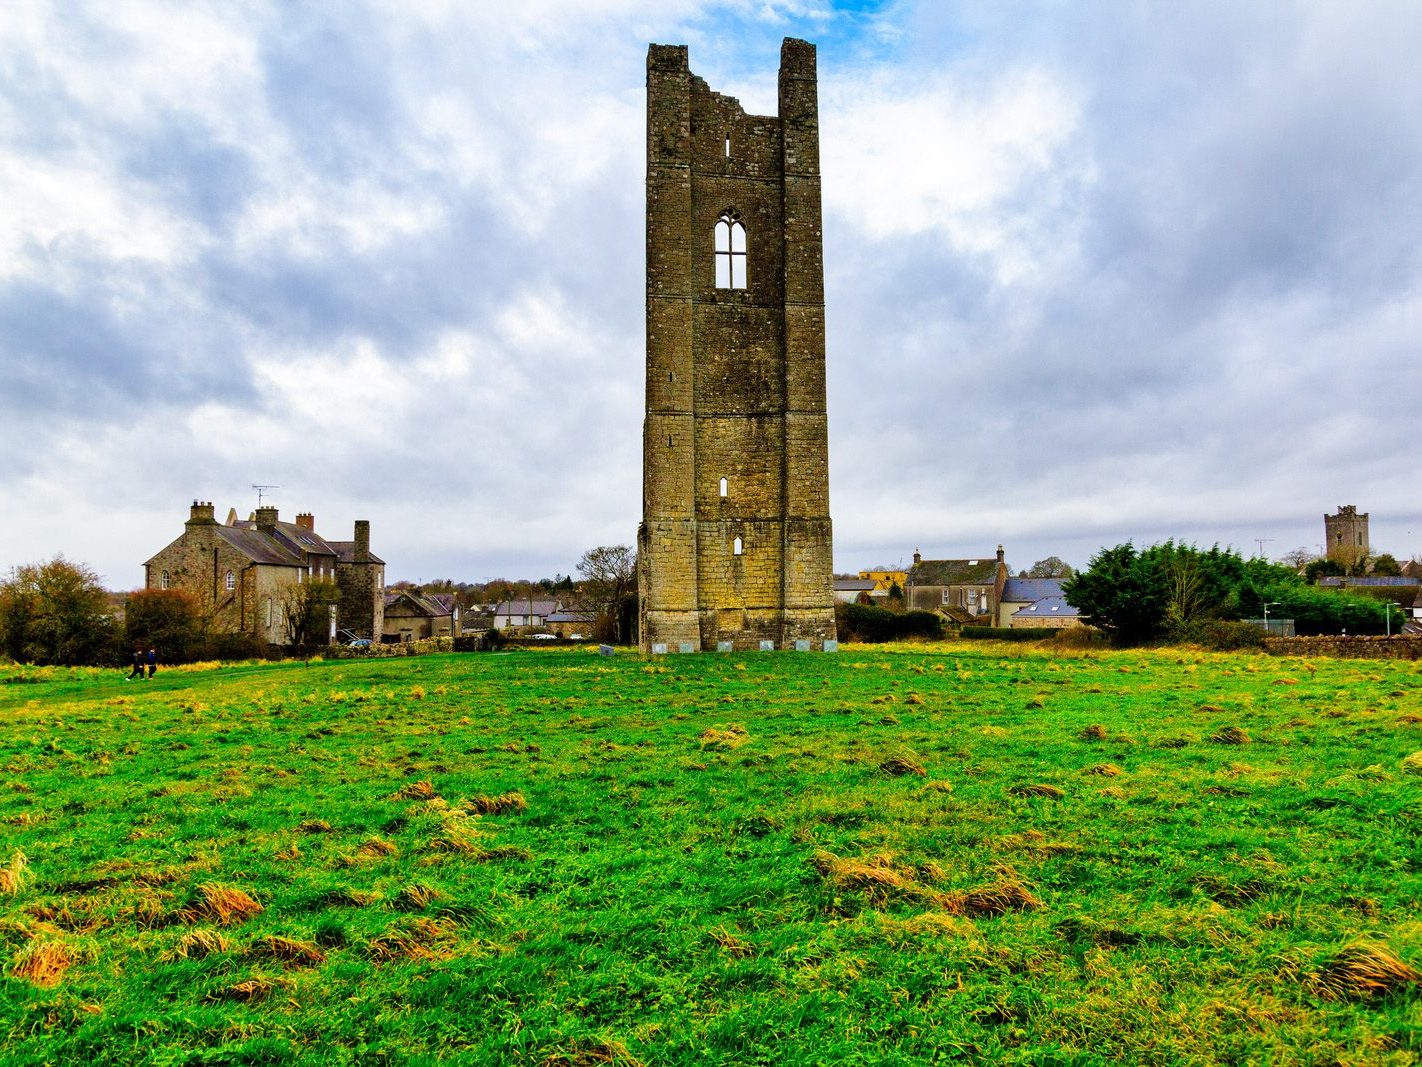 THE YELLOW STEEPLE DOMINATES THE TOWN OF TRIM [ALSO KNOWN AS ST MARYS ABBEY]-226744-1